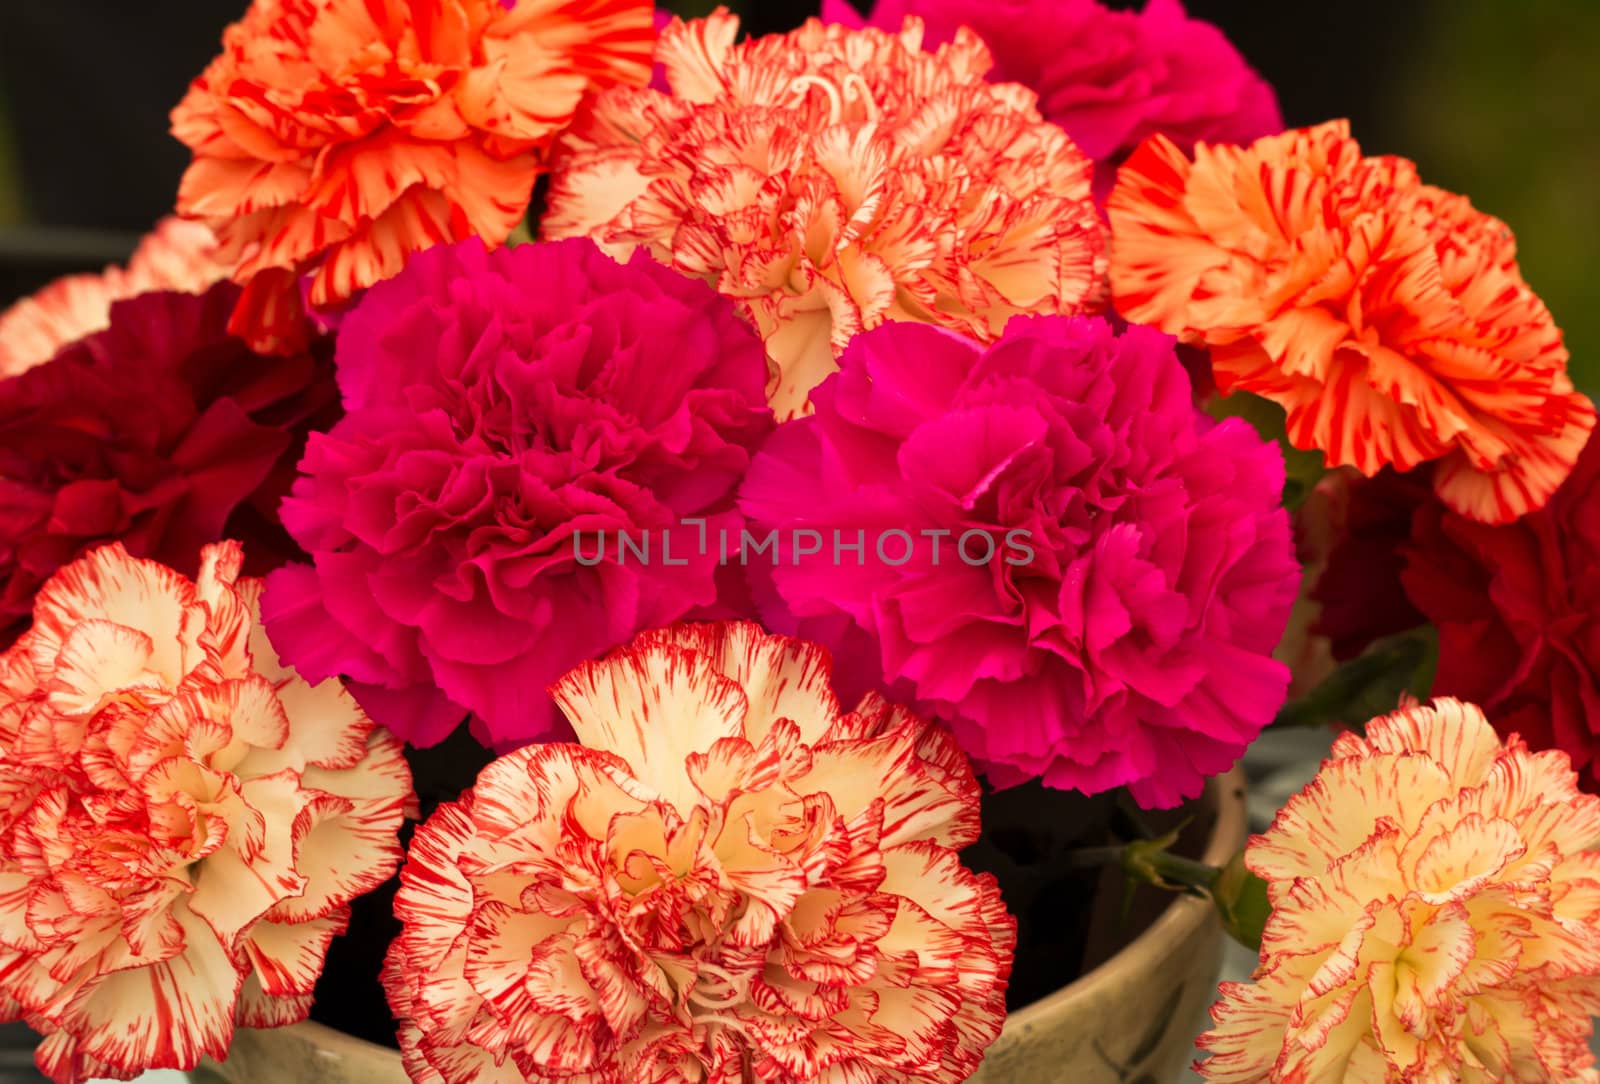 A display of colourful Carnations (Dianthus)